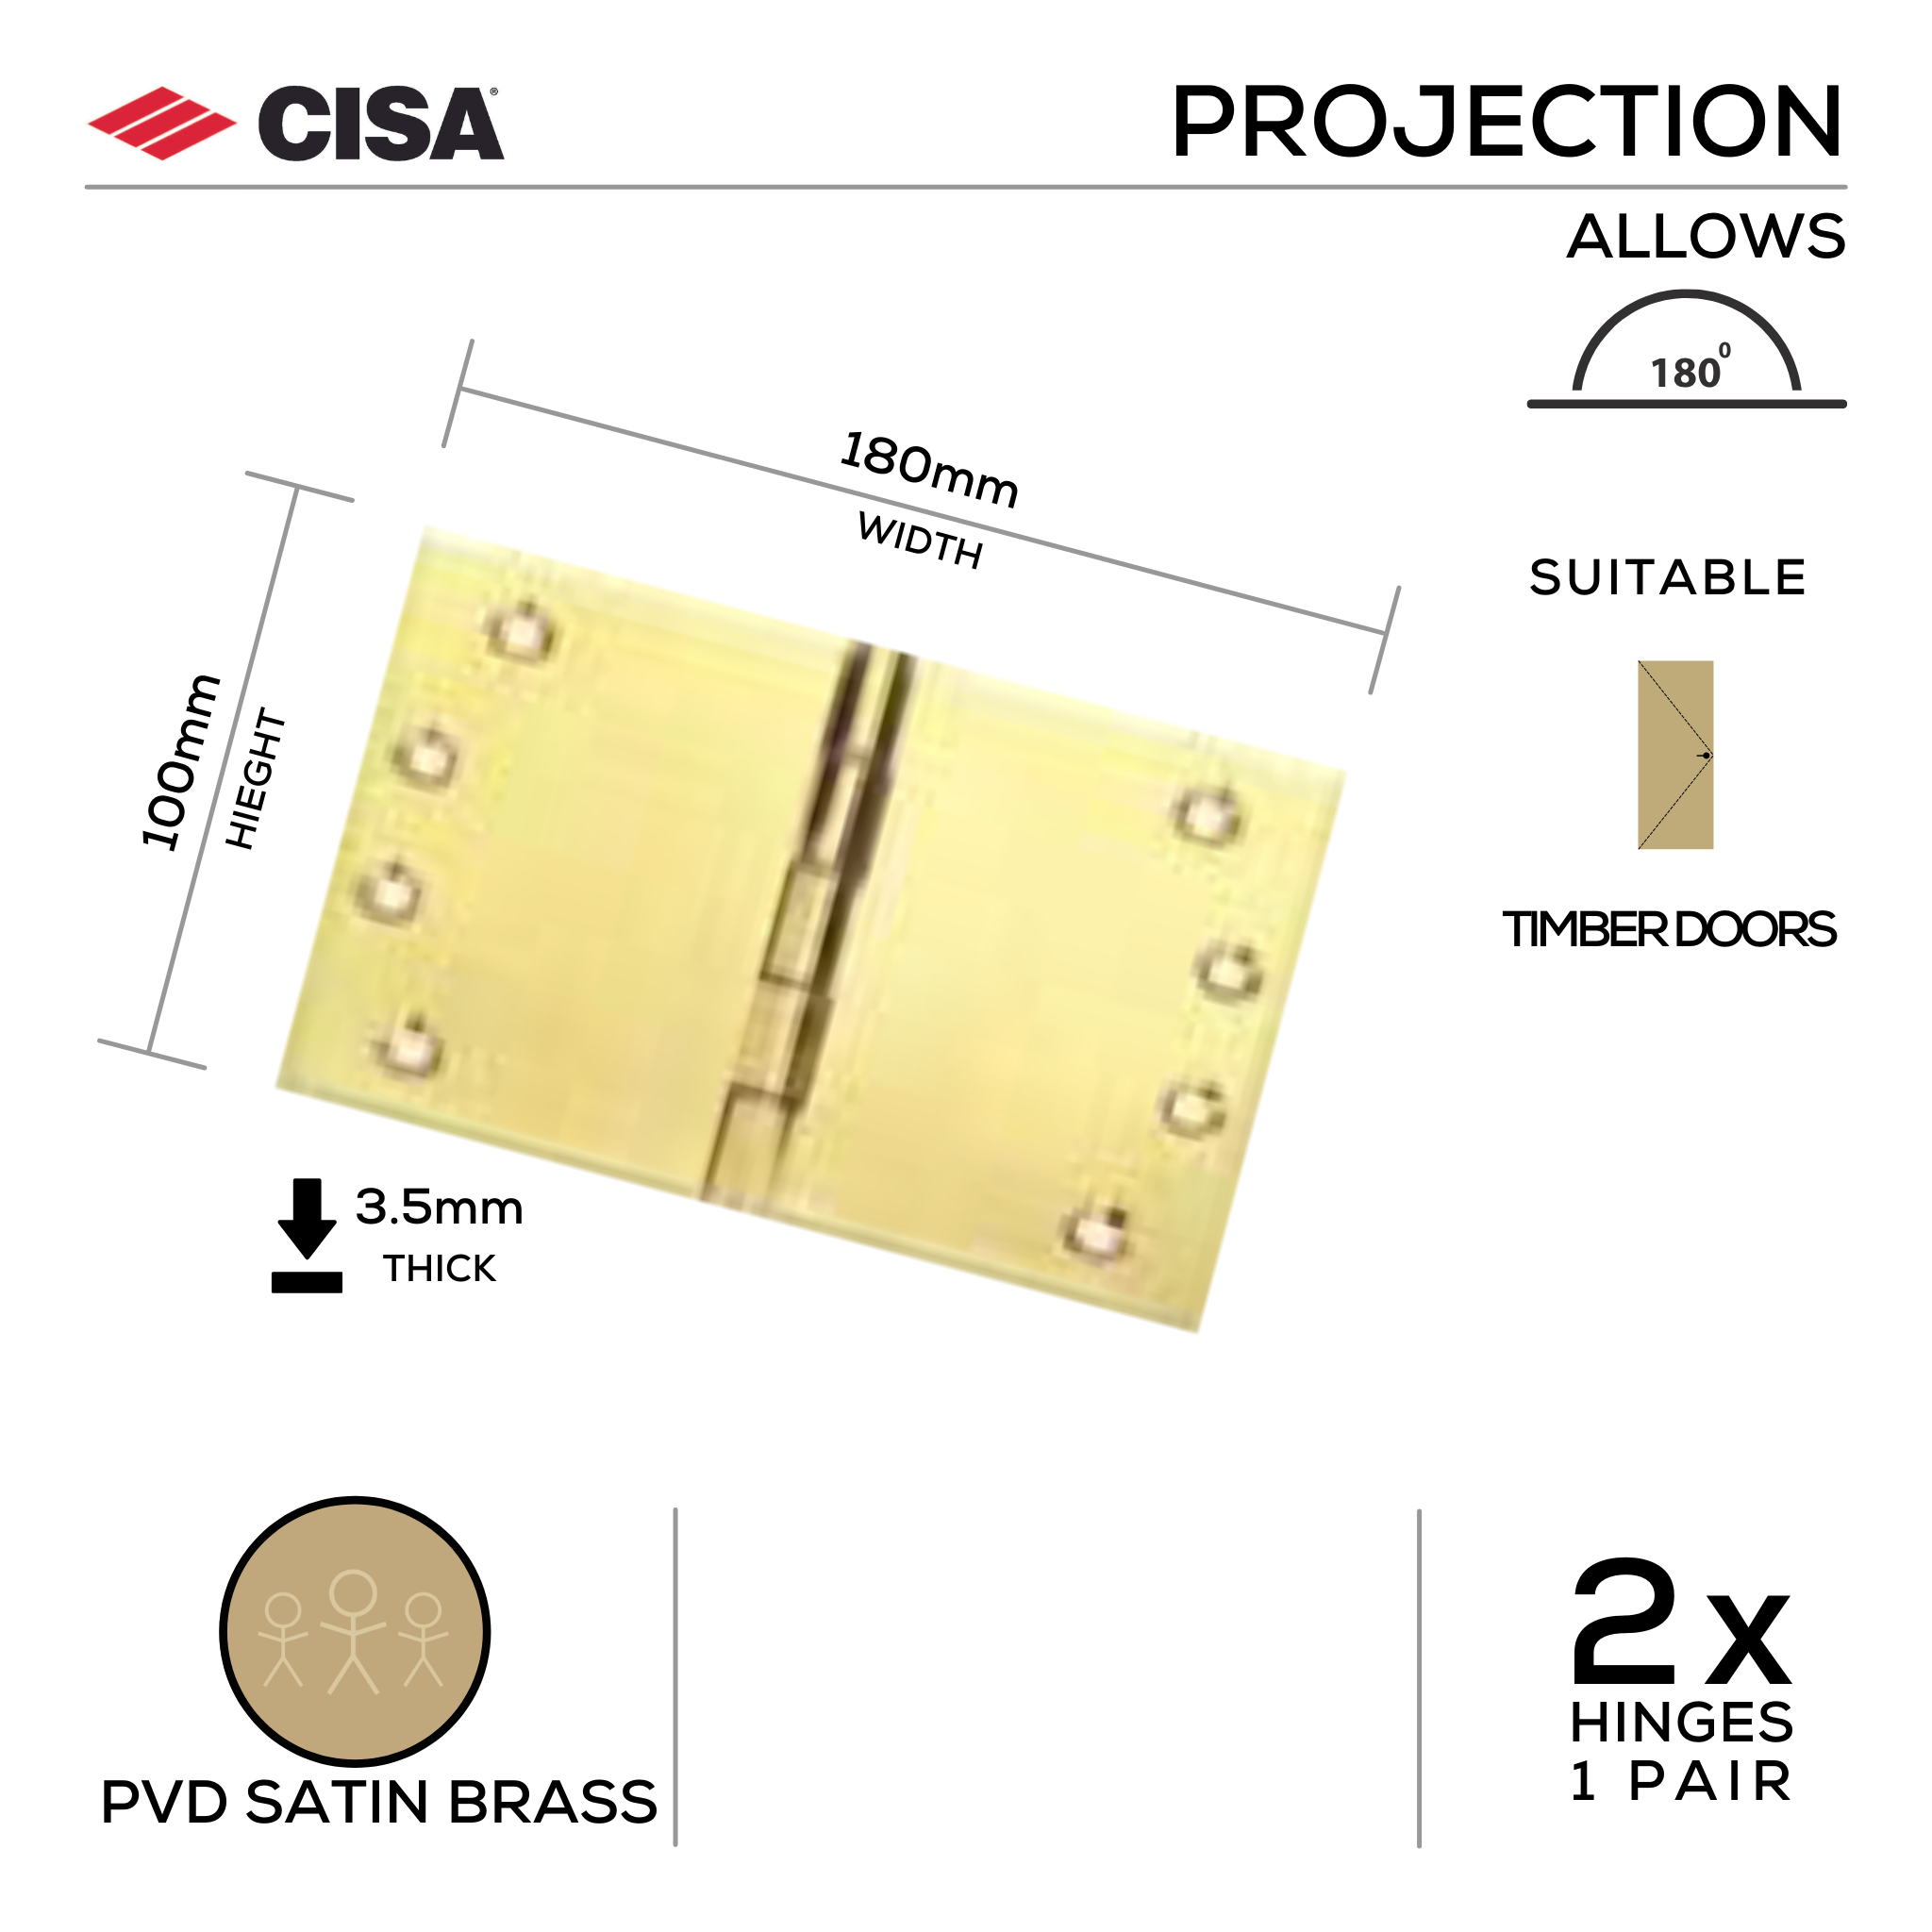 FH180X3-BR, Projection Hinge, 2 x Hinges (1 Pair), 100mm (h) x 180mm (w) x 3.5mm (t), Satin Brass, CISA